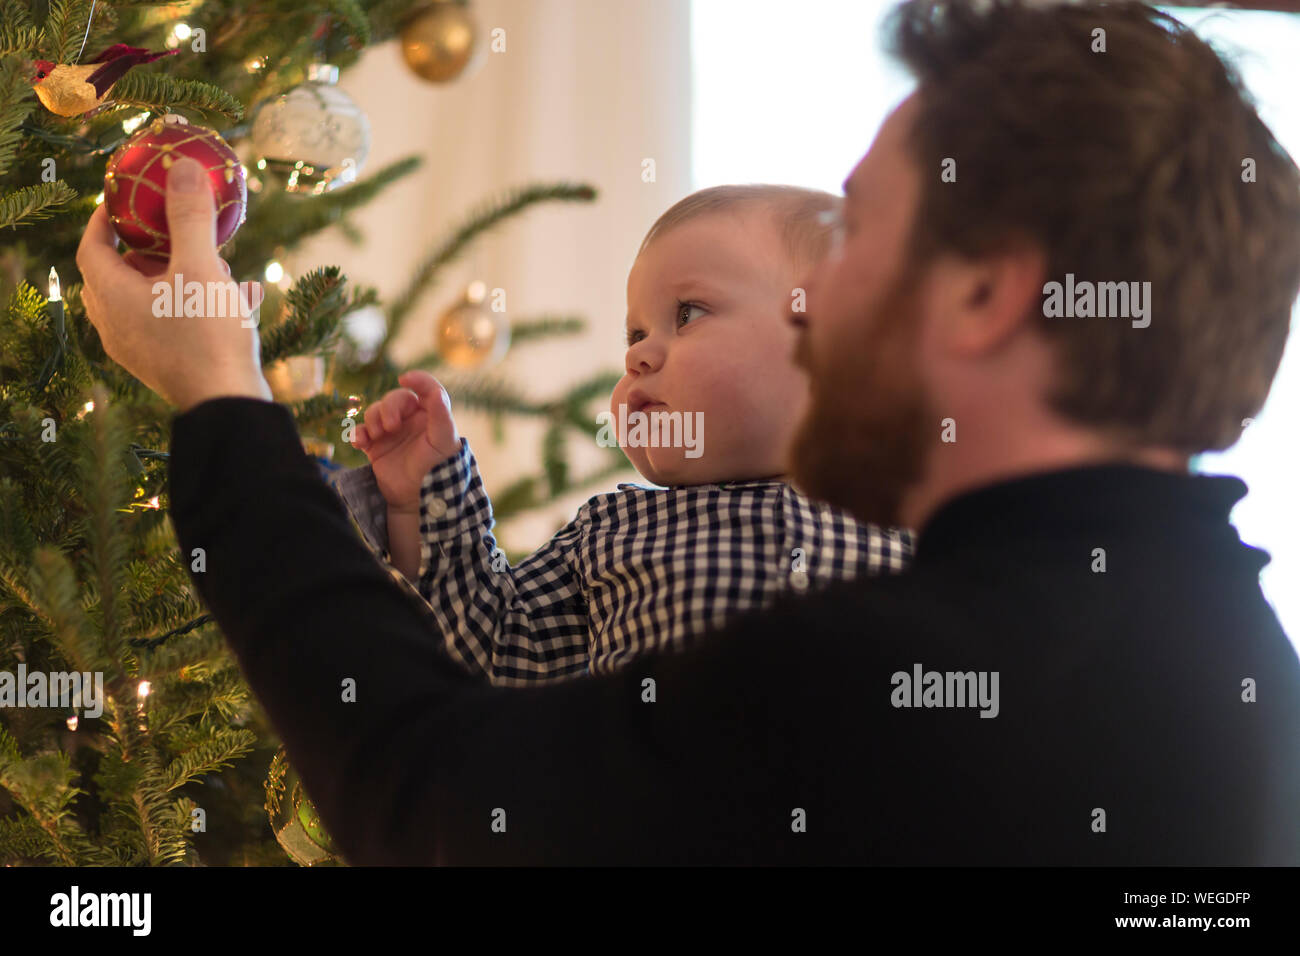 Father holds 1 year old boy who is reaching for decoration on Christmas tree Stock Photo